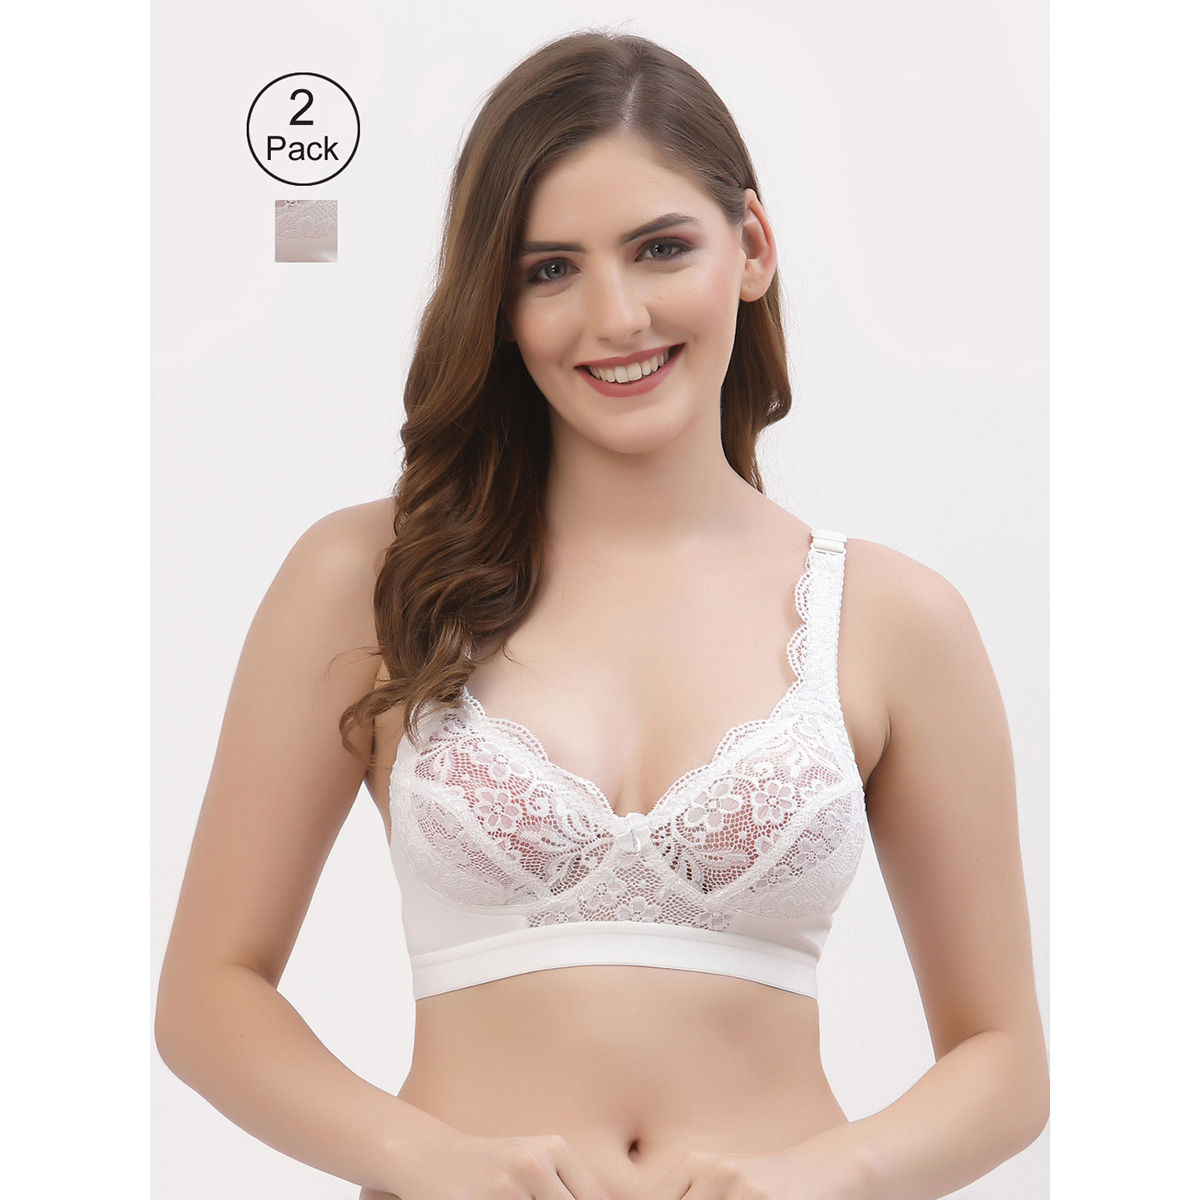 Bright Home Decor™ Women's Non Padded Air Bra Pack of 2 Skin and White